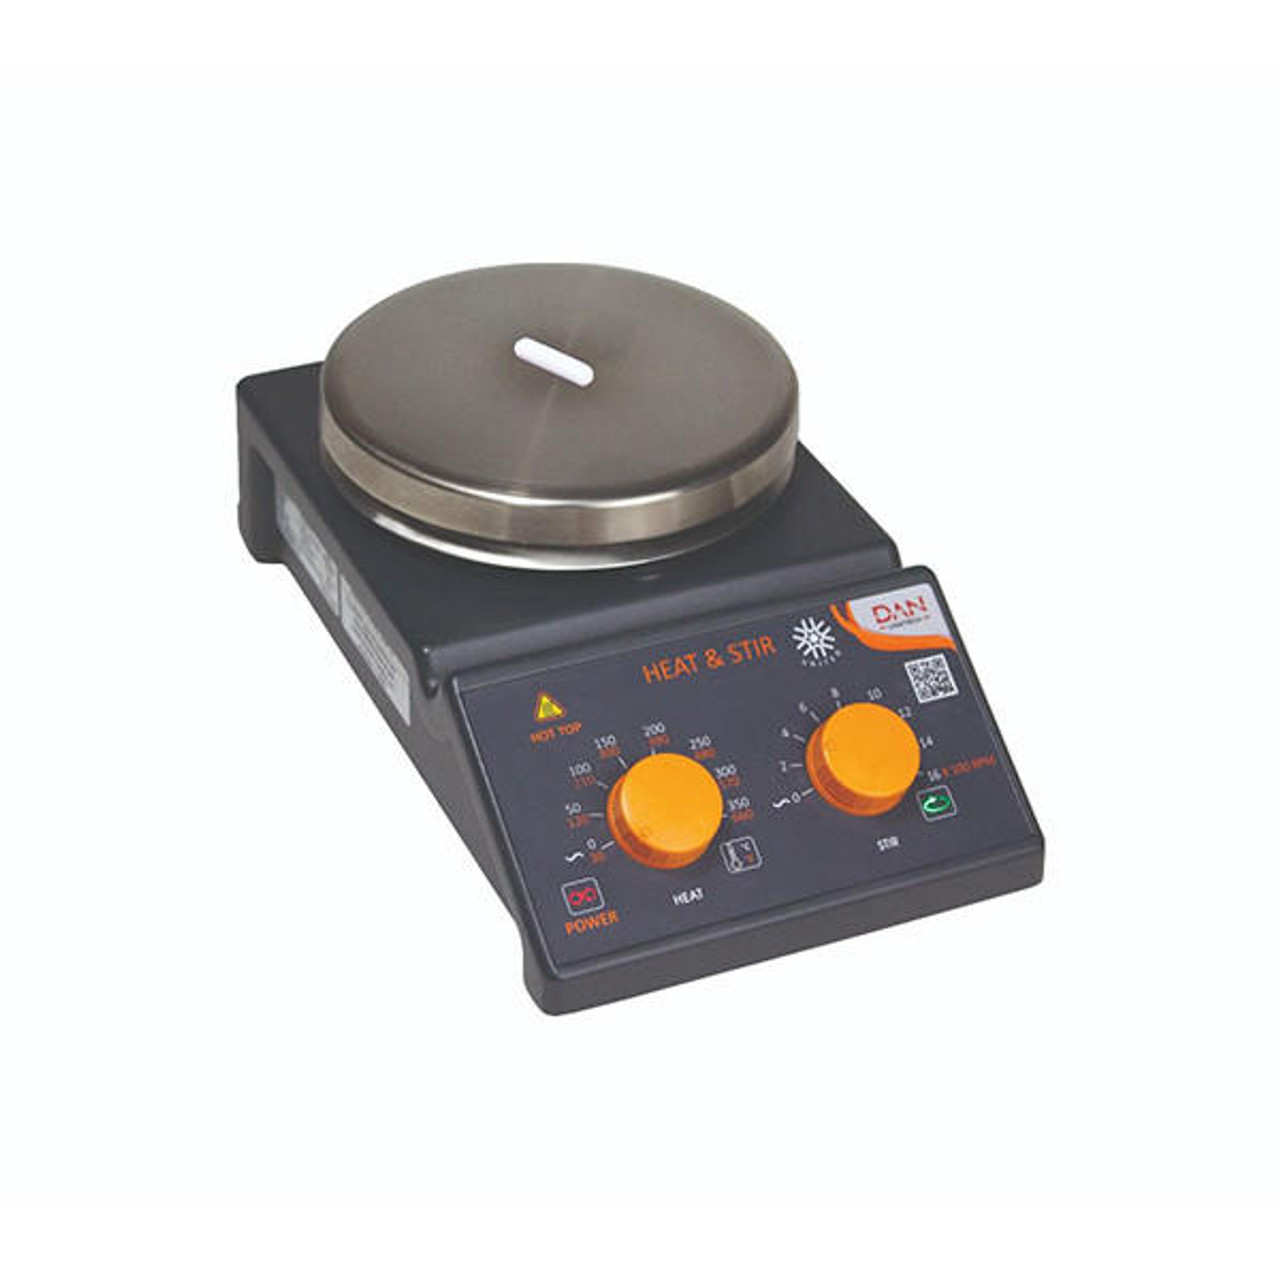 https://cdn11.bigcommerce.com/s-zgzol/images/stencil/1280x1280/products/52369/133456/united-scientific-hotpag-analog-hot-plate-with-magnetic-stirrer-csa-approved__04226.1673913904.jpg?c=2